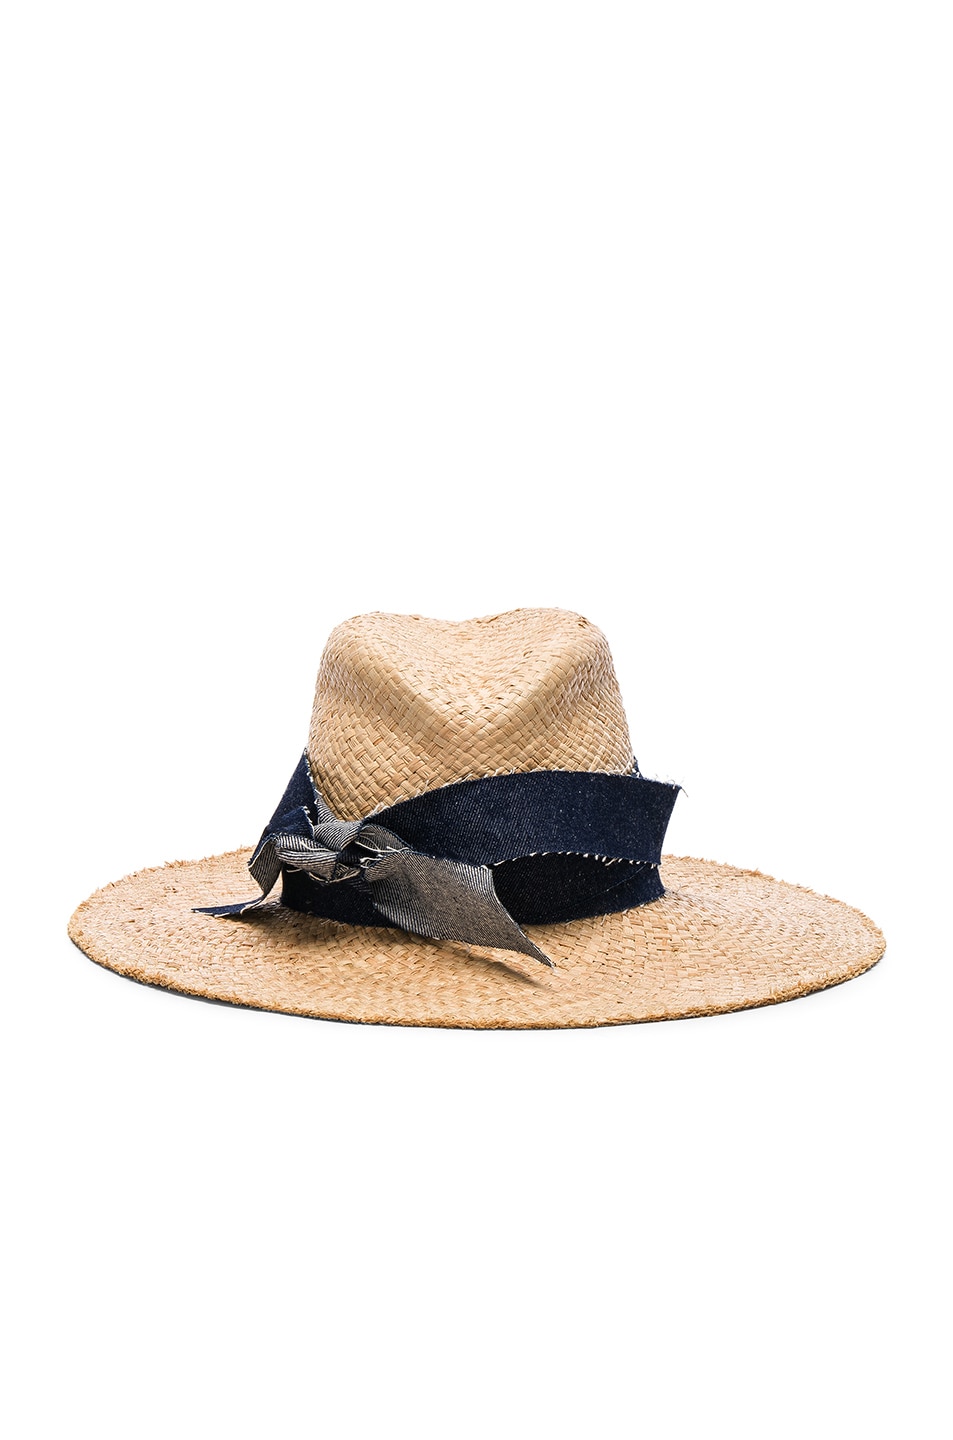 Image 1 of Lola Hats Denim First Aid Hat in Natural & Denim